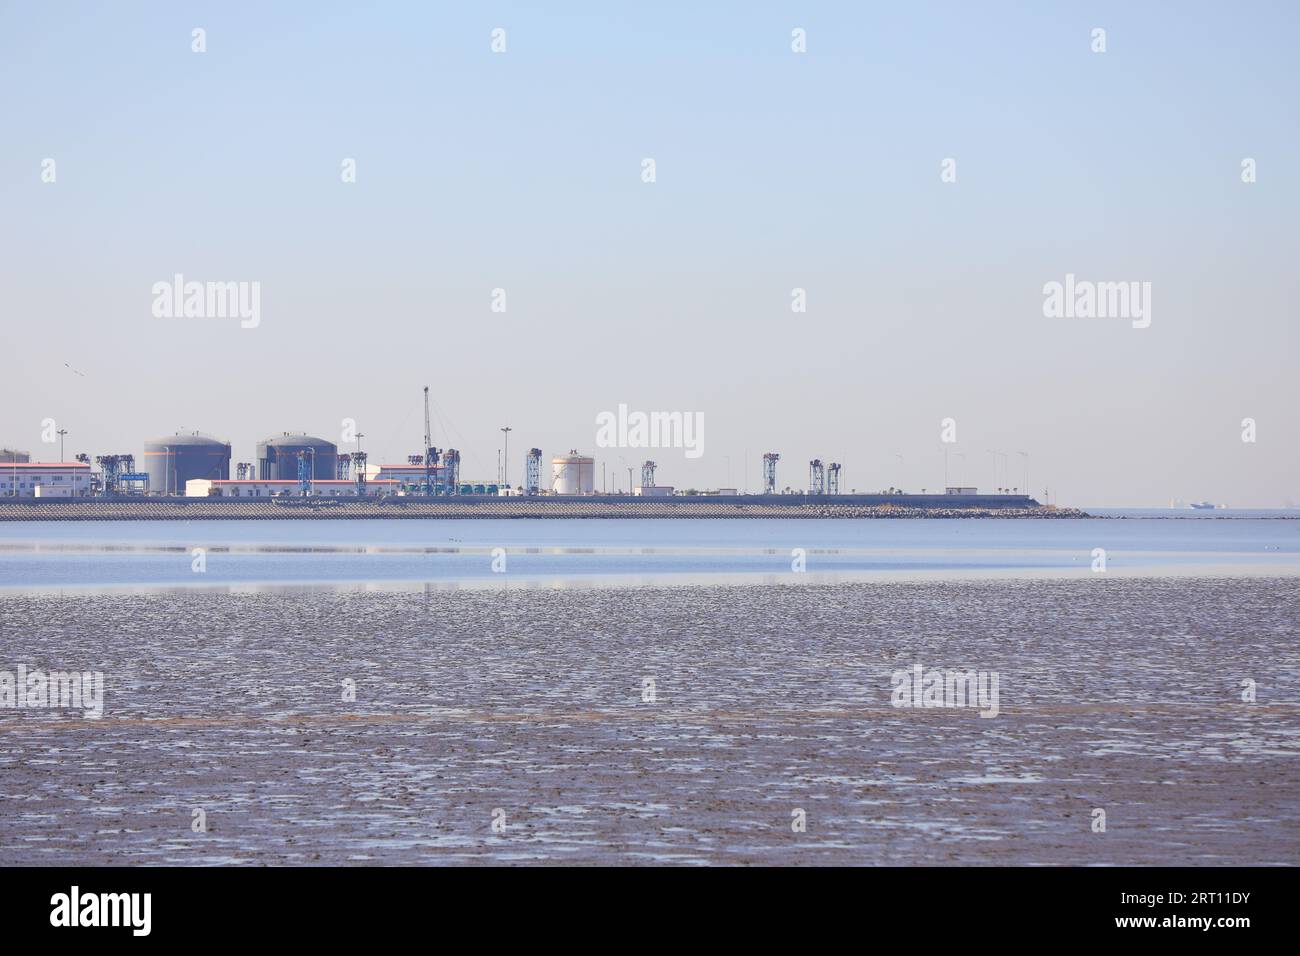 Caofeidian, China - November 9, 2020: Prospect of artificial island 1 in Hebei Tangshan, Hebei Province, China Stock Photo